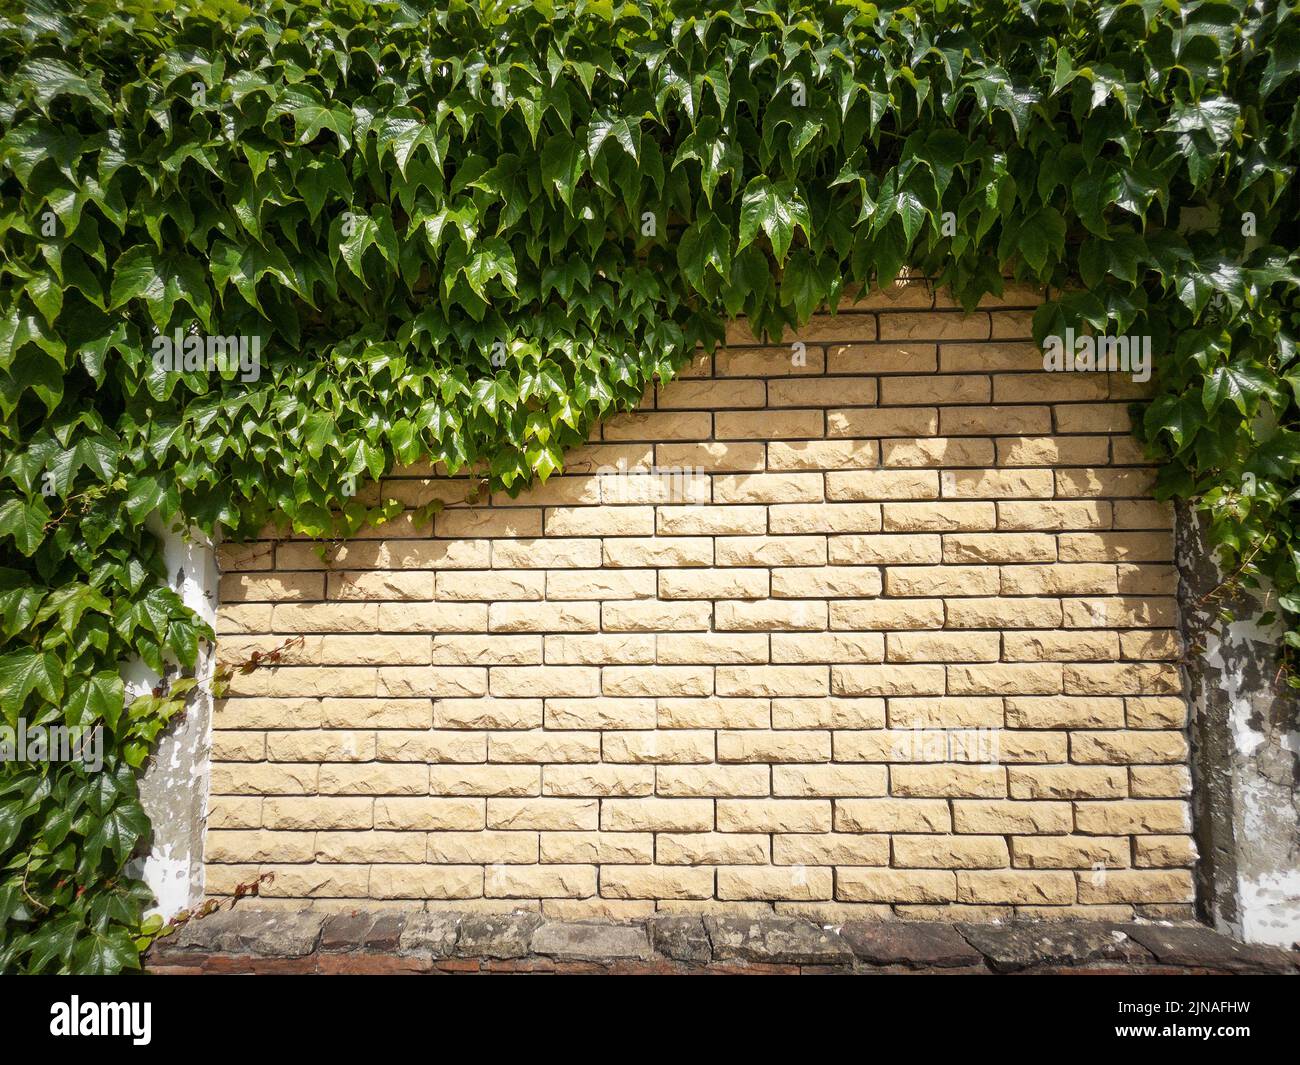 The fence is made of beige textured brick covered with plants in full screen Stock Photo